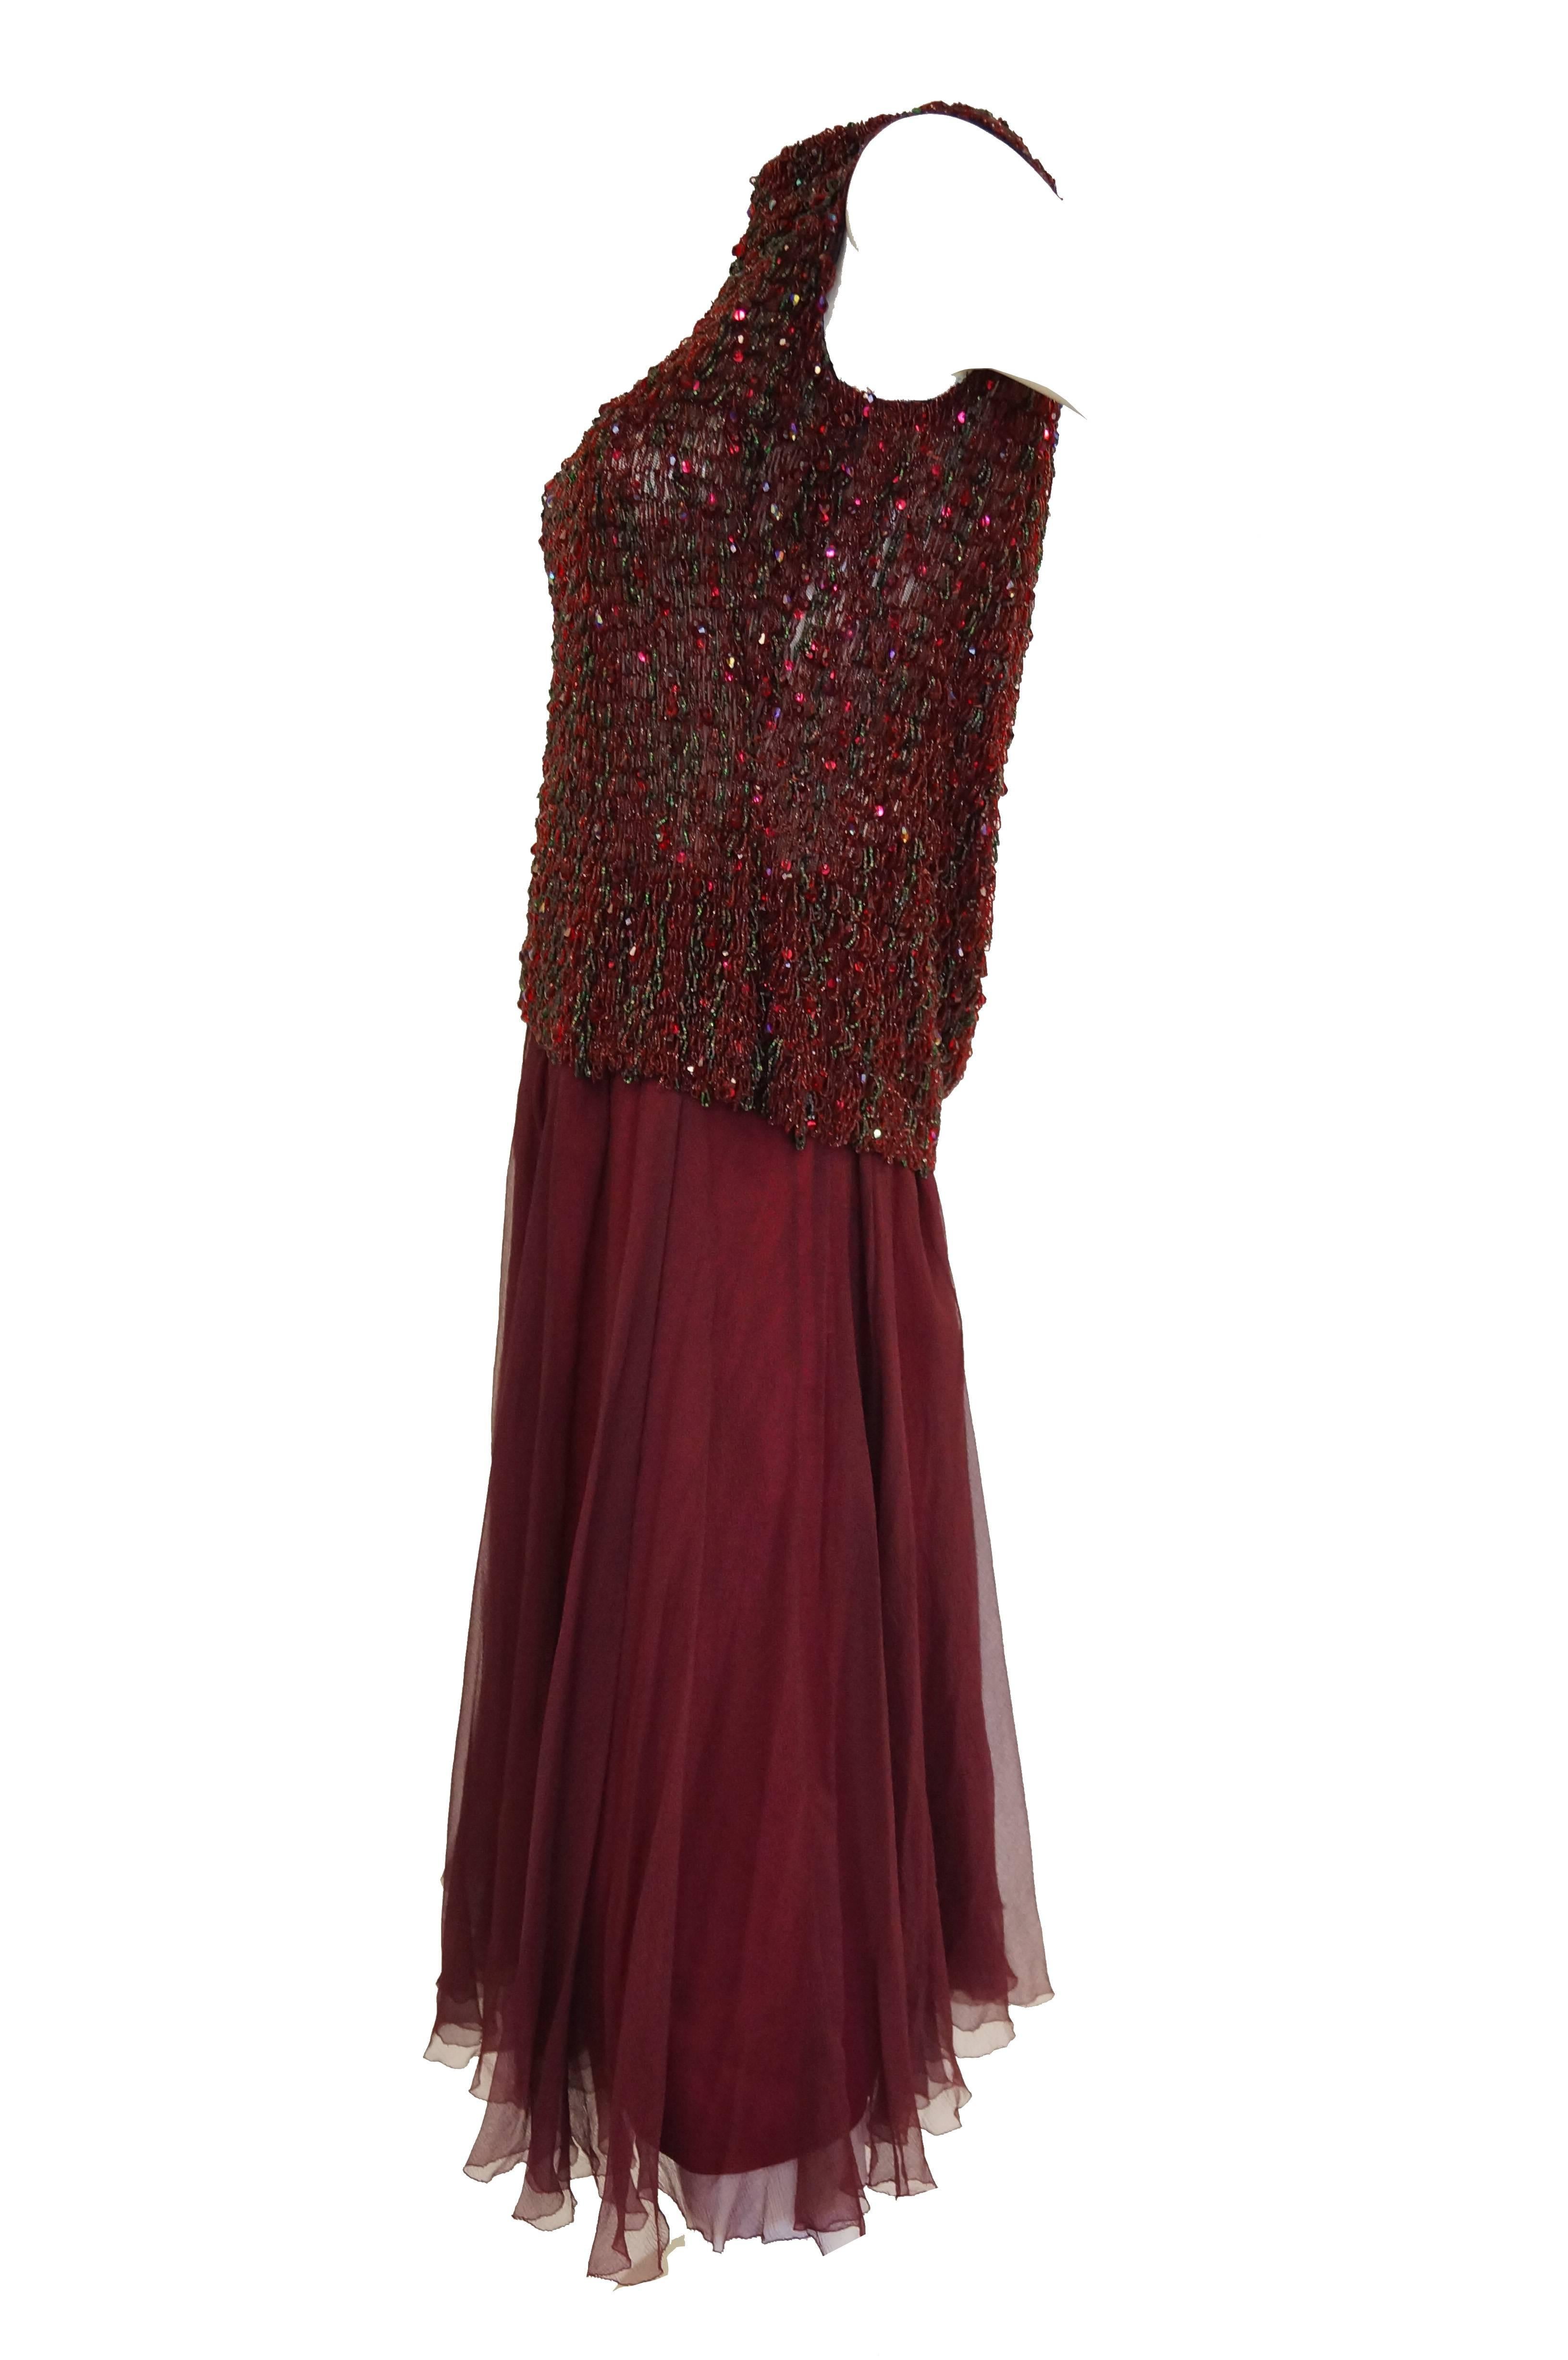 Brown Yves Saint Laurent Couture Evening Dress Owned by Claudette Colbert, 1963  For Sale